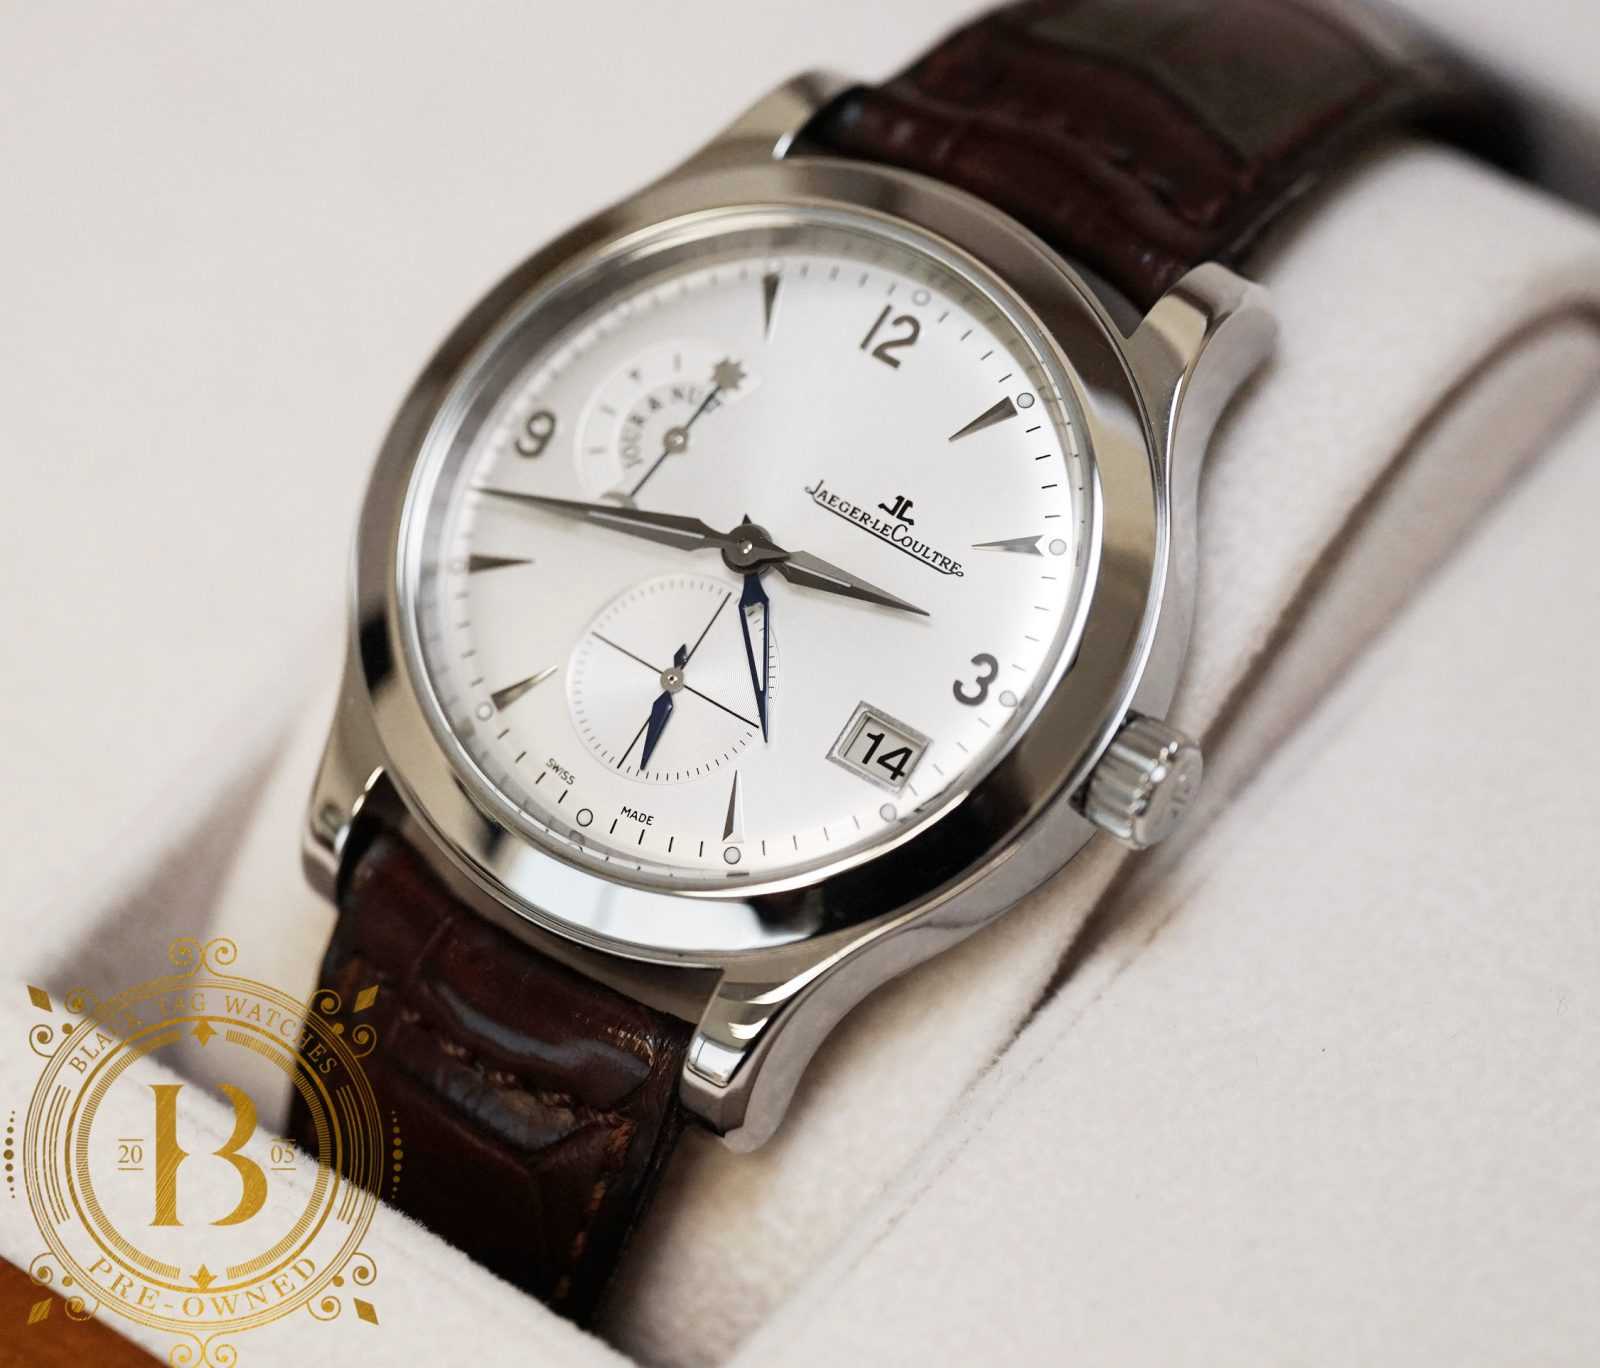 Jaeger-LeCoultre Master Control Hometime Wristwatch Q1628420 for $5,600 ...